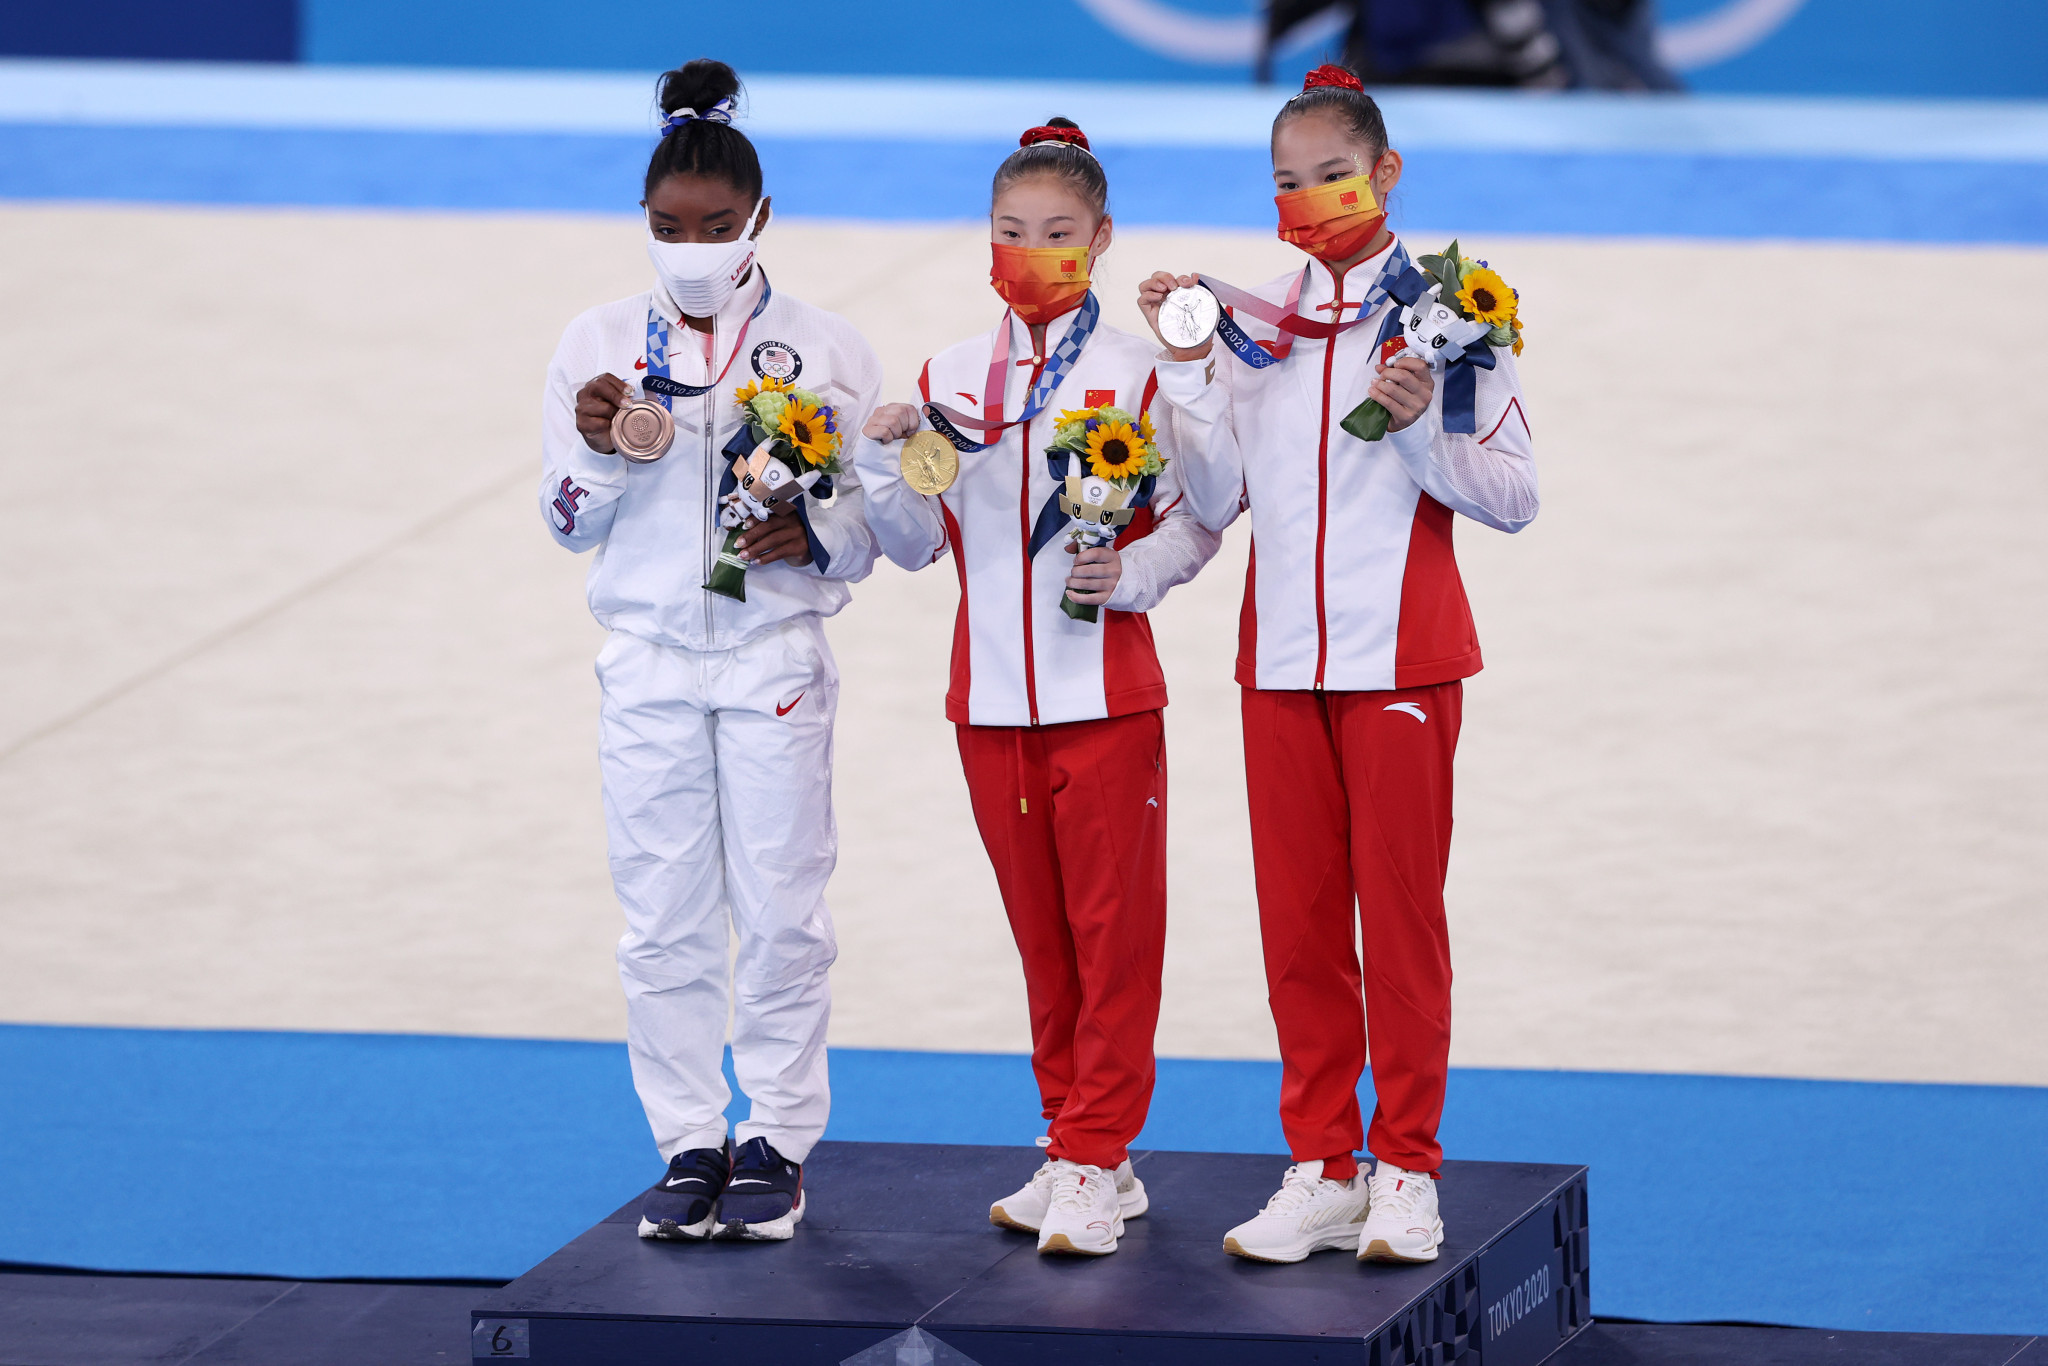 Simone Biles was just happy to stand on the podium alongside the gold and silver medallists Guan Chenchen, centre, and Tang Xijing, right, from China ©Getty Images